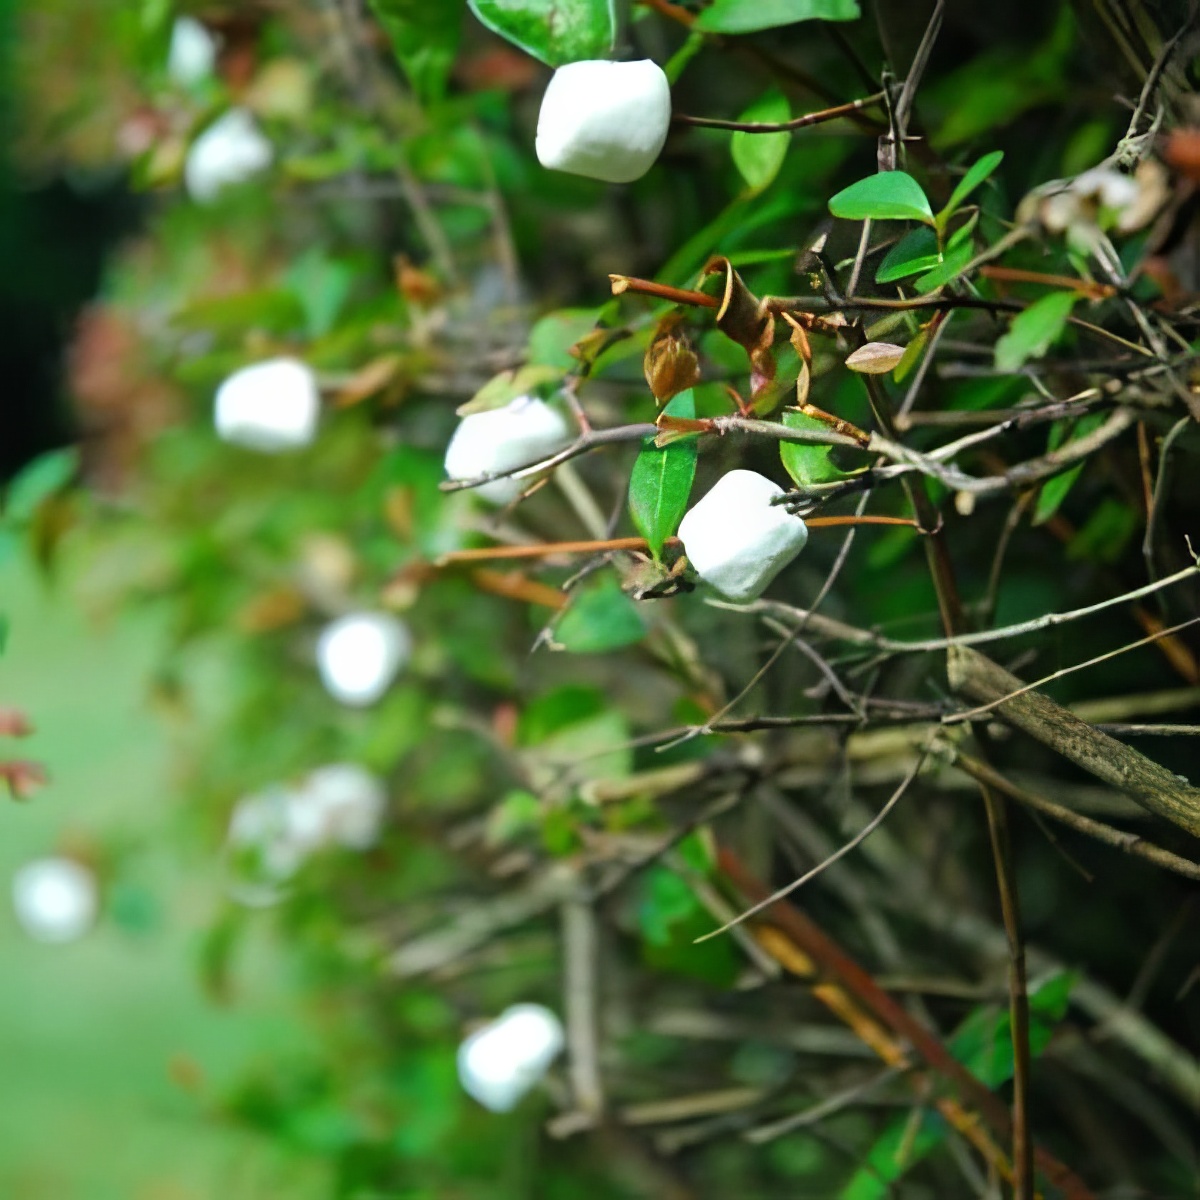 Pick some marshmallows outside under a marshmallow fruit bearing tree this April Fools!